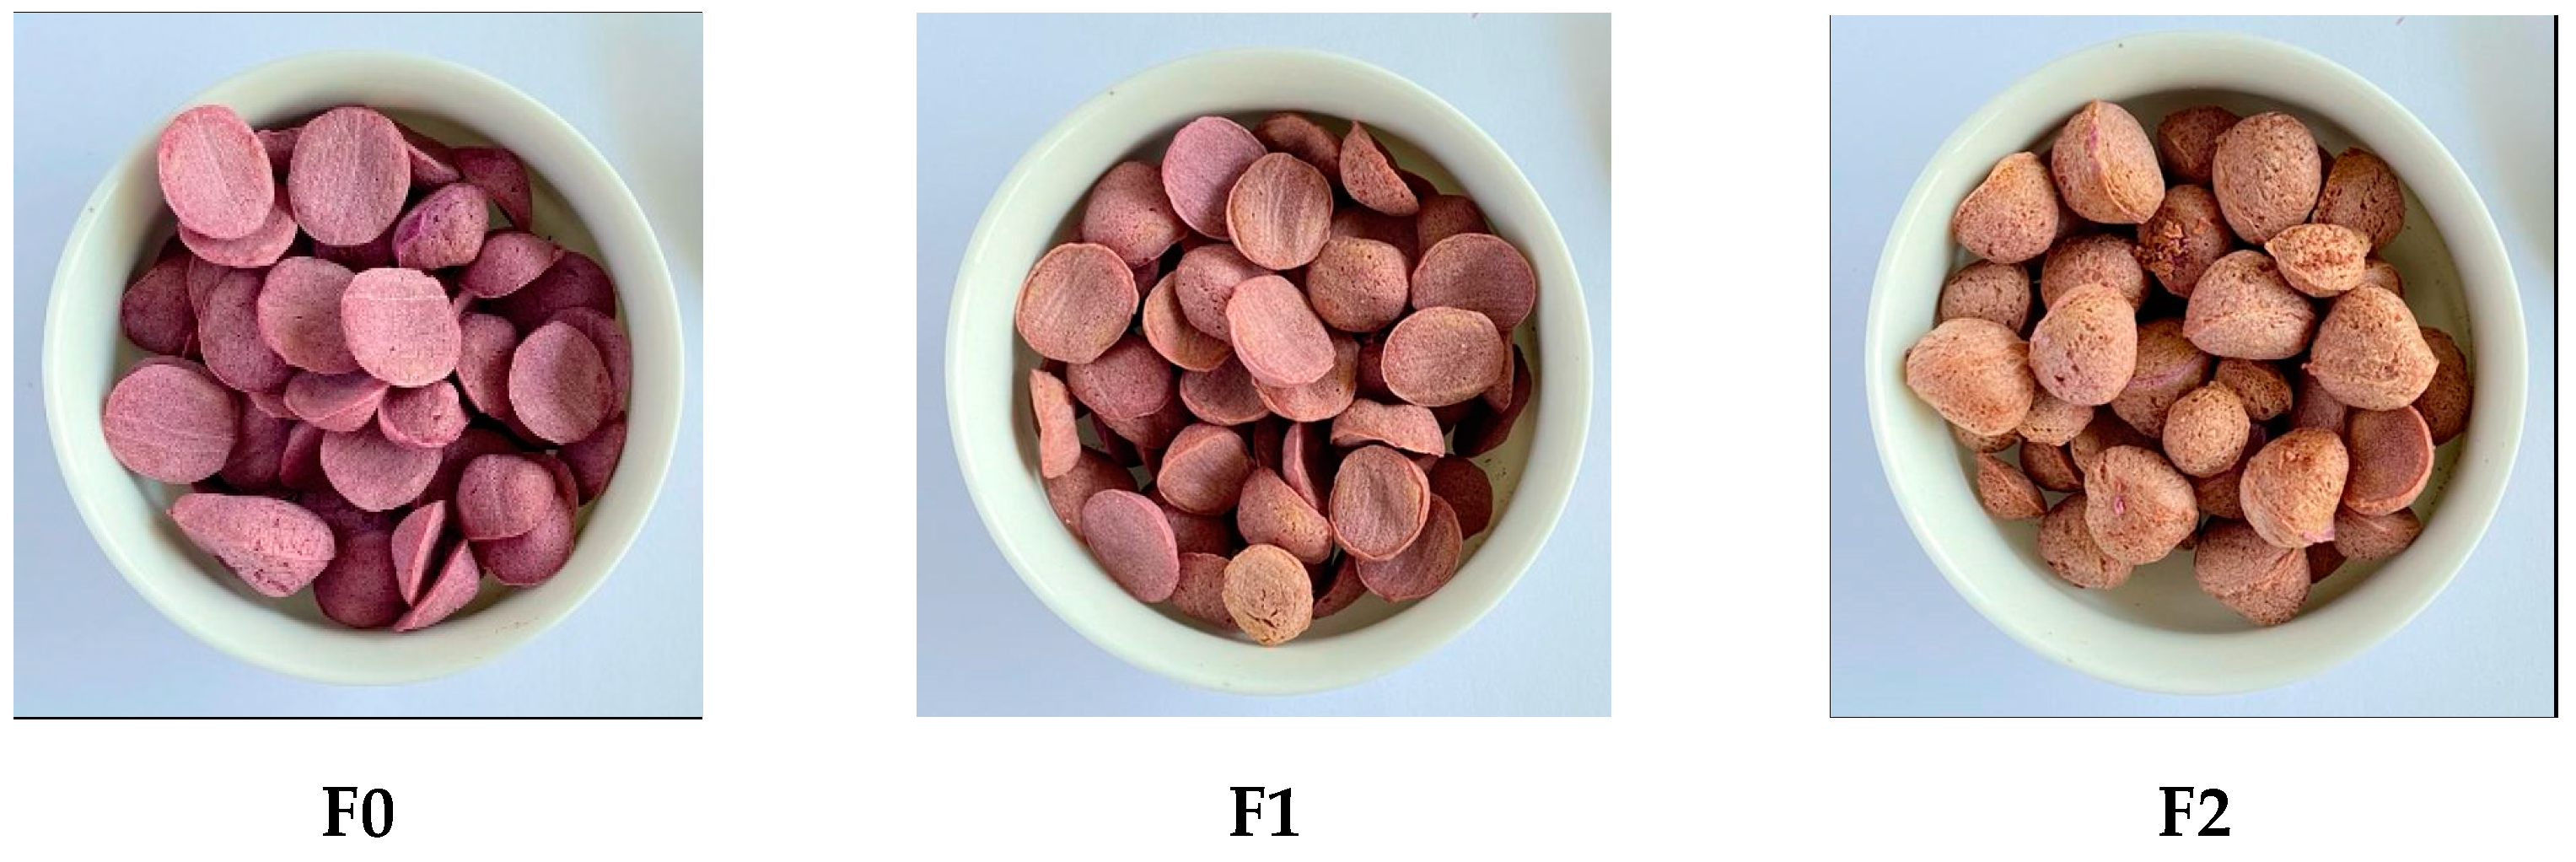 Foods | Free Full-Text | Kidney Bean Substitution Ameliorates the  Nutritional Quality of Extruded Purple Sweet Potatoes: Evaluation of  Chemical Composition, Glycemic Index, and Antioxidant Capacity